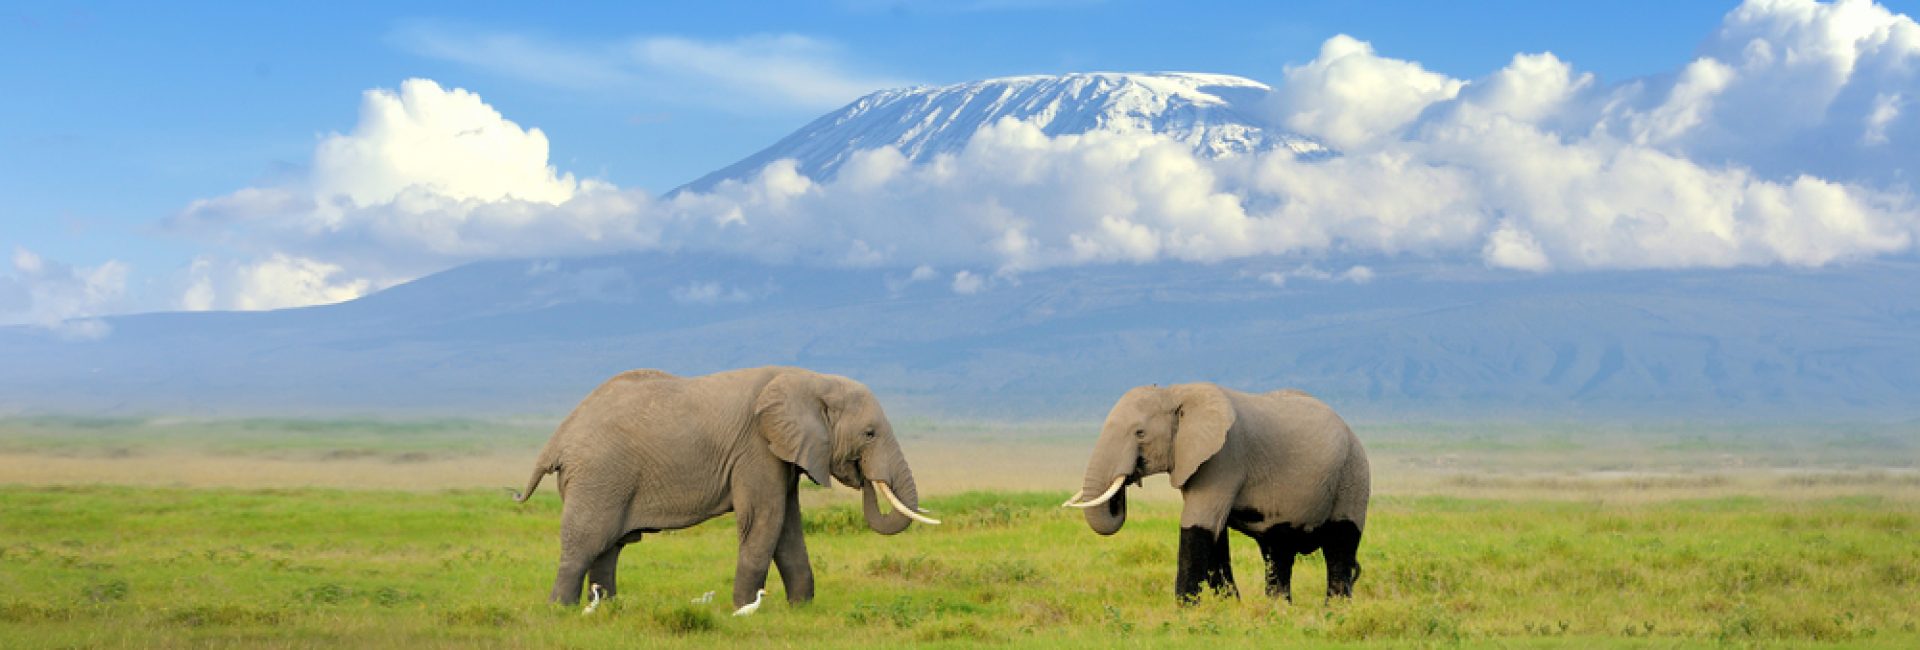 Elephant,With,Mount,Kilimanjaro,In,The,Background